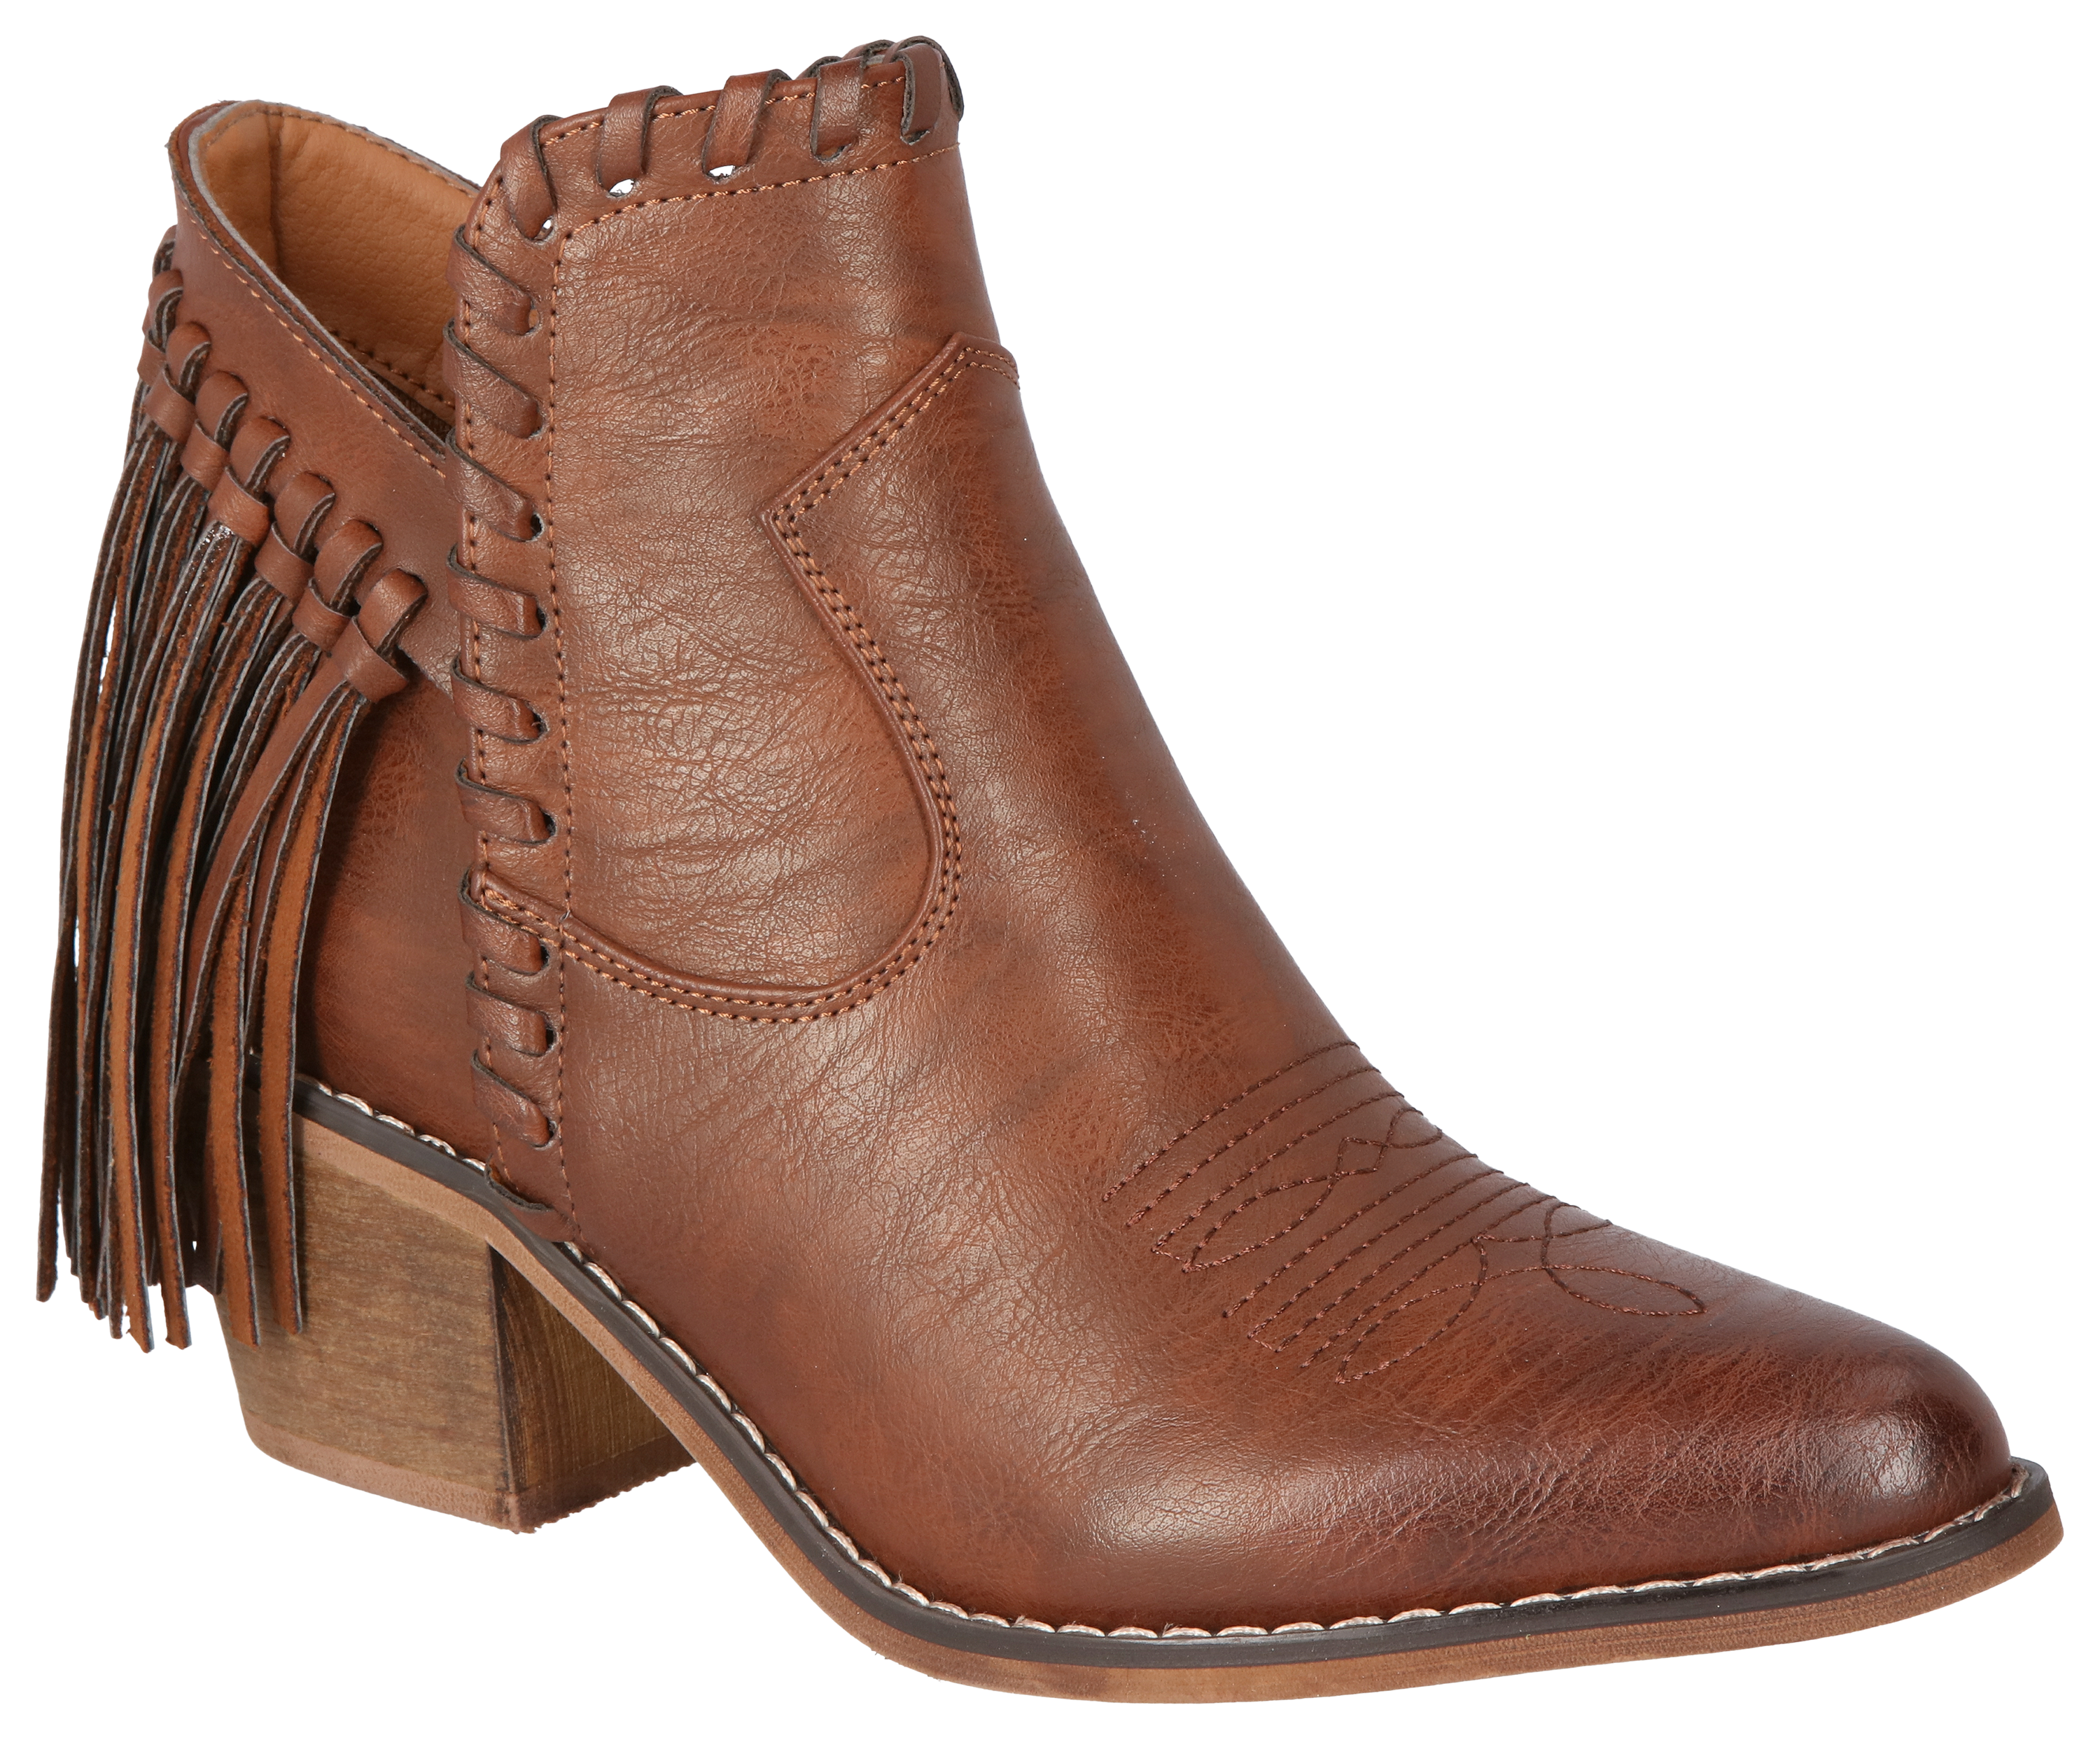 Natural Reflections Women's Shoes & Boots